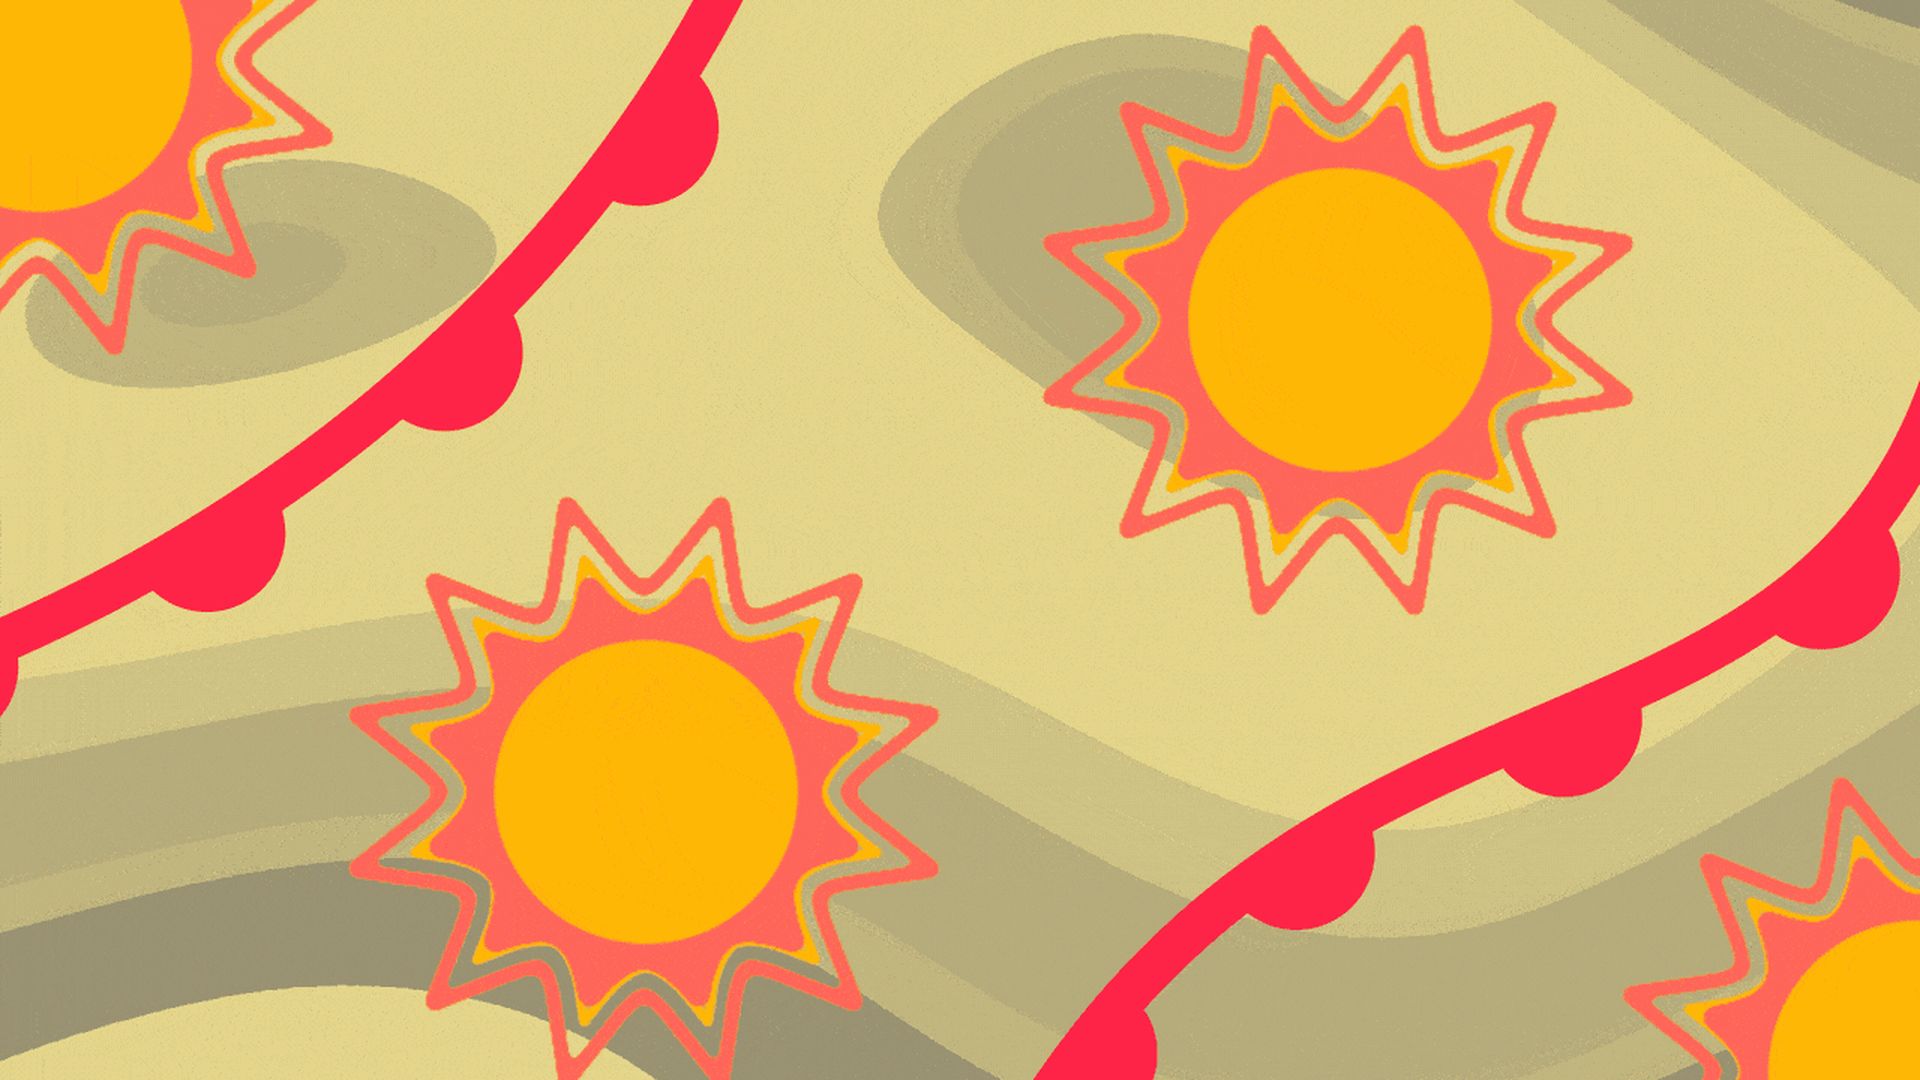 Illustration of a weather map with suns, warm front symbols and changing background colors.